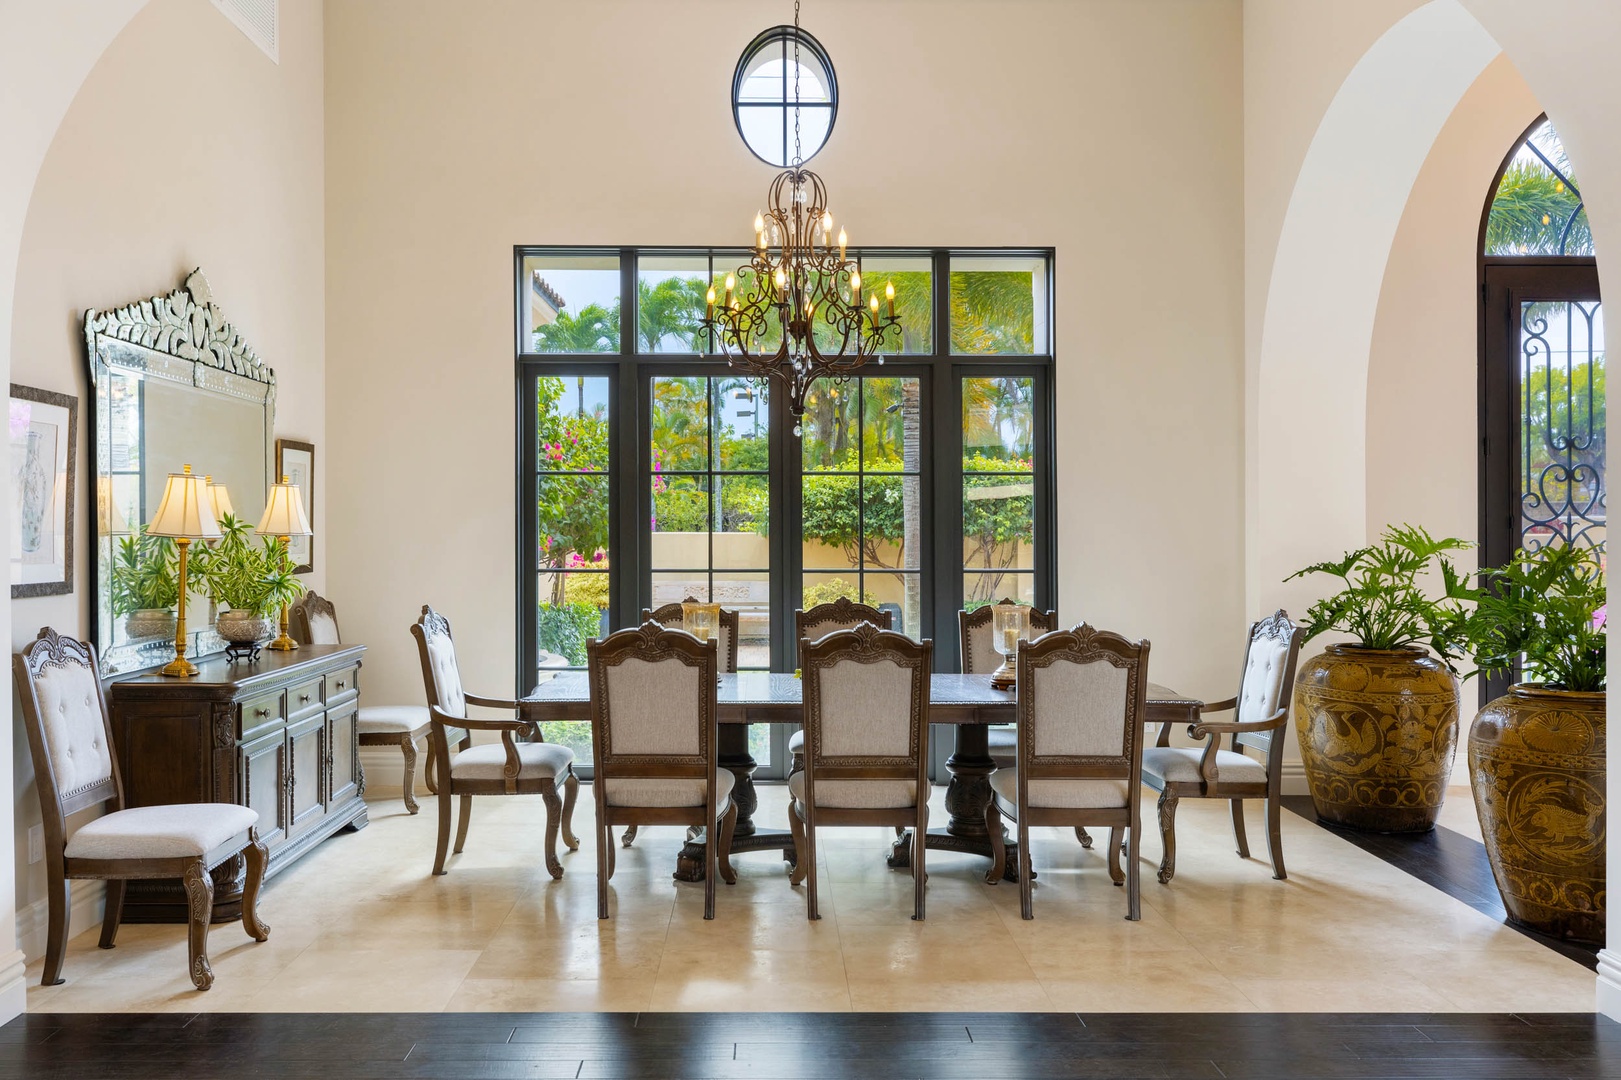 Honolulu Vacation Rentals, Royal Kahala Estate - Elegantly appointed dining space with a tropical view.